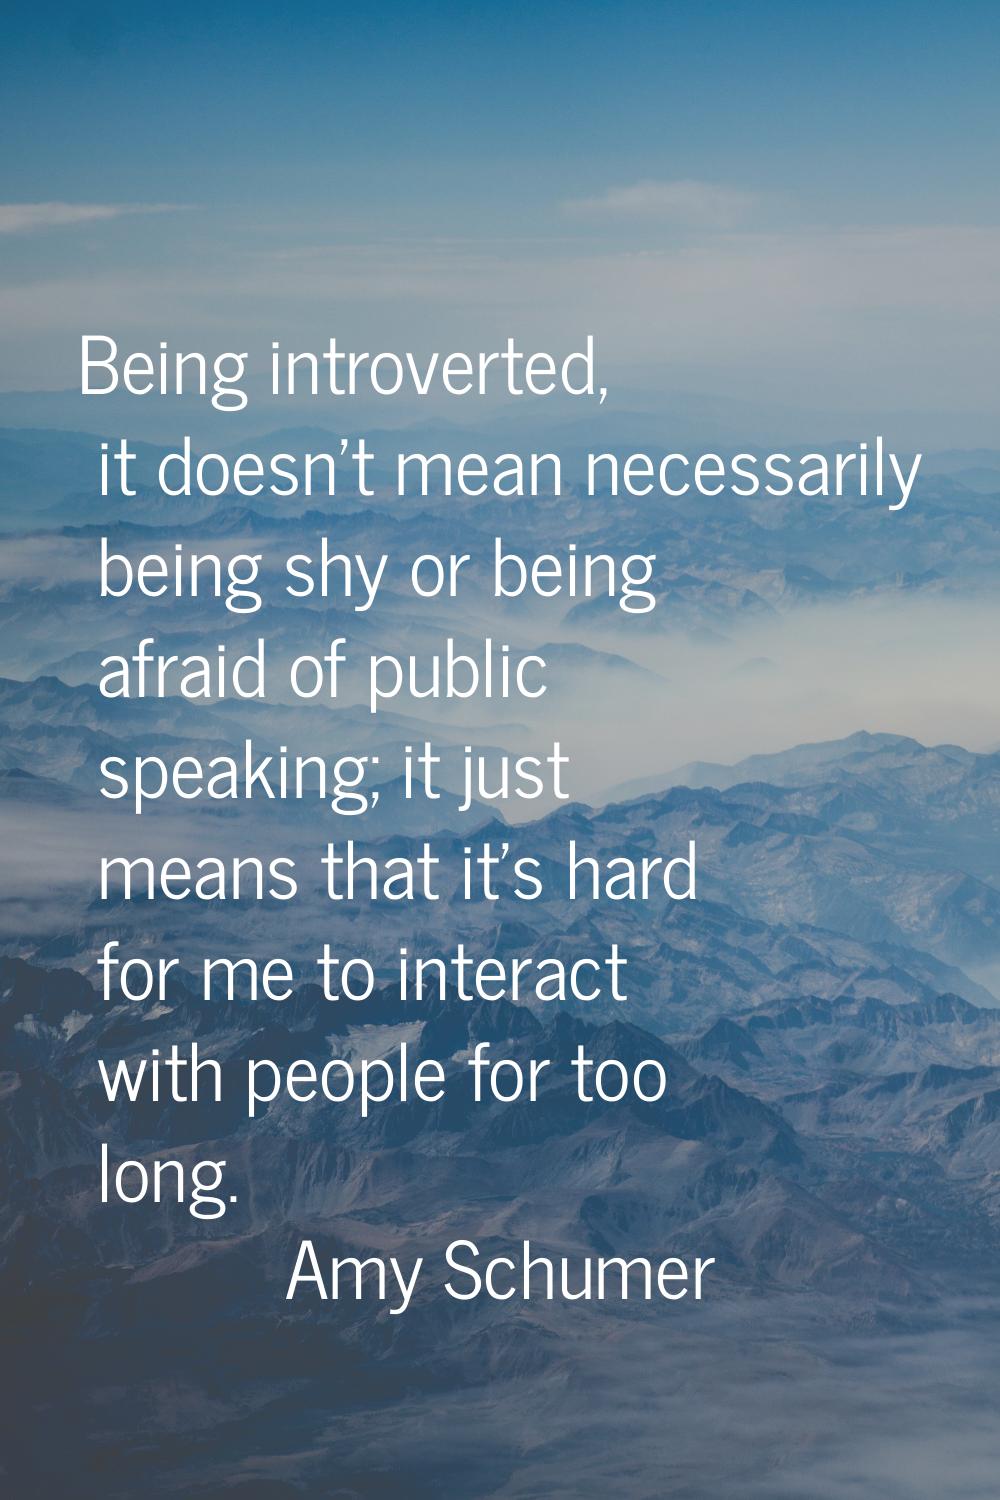 Being introverted, it doesn't mean necessarily being shy or being afraid of public speaking; it jus